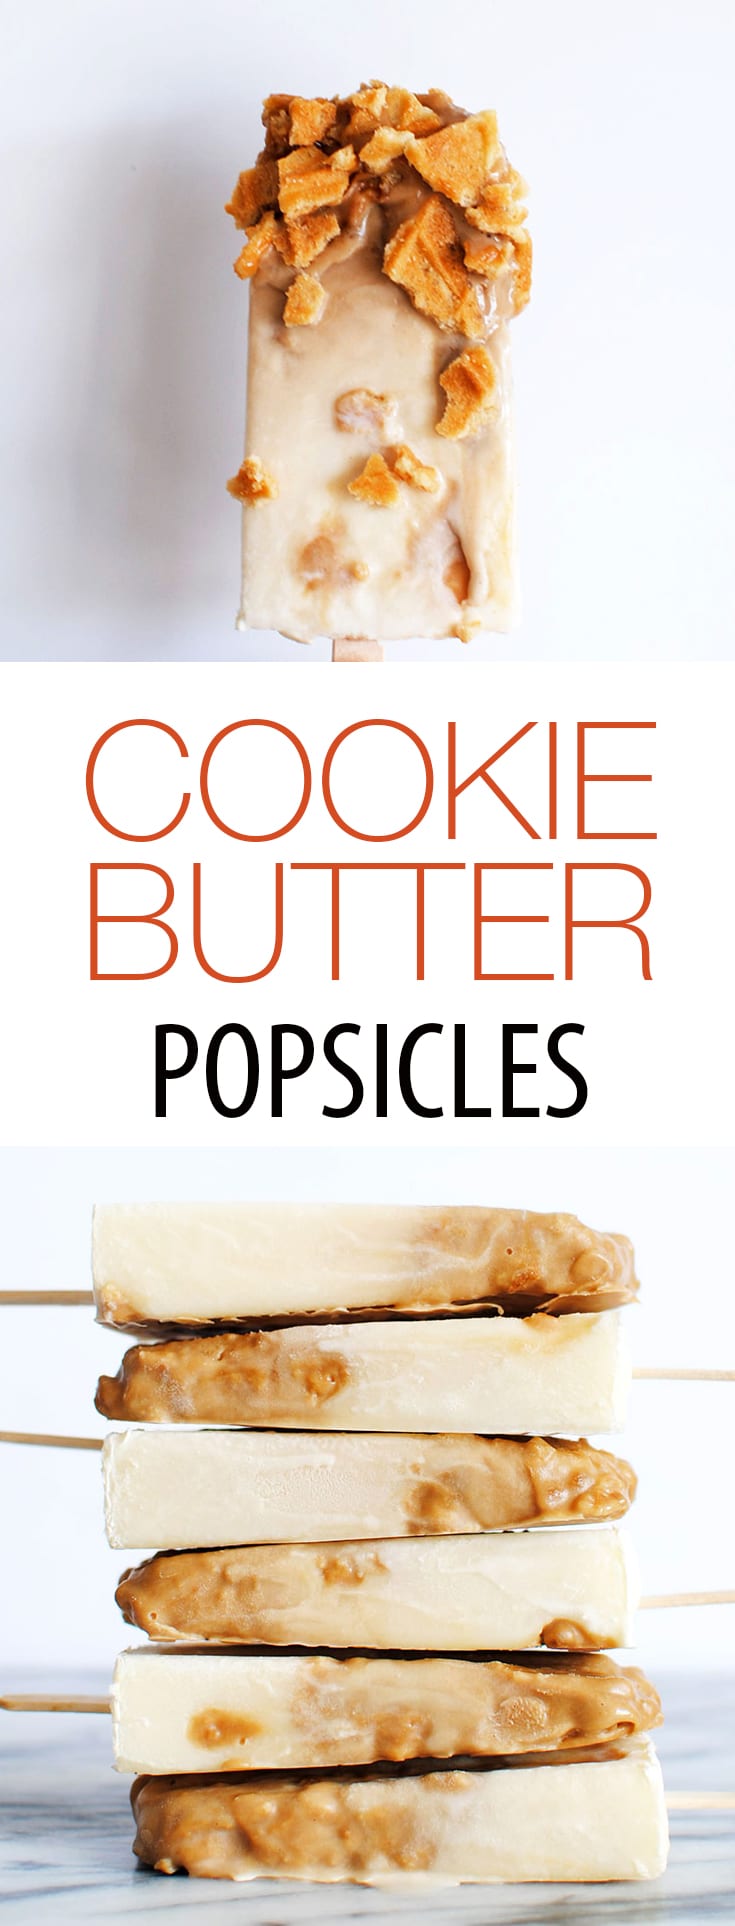 Cookie Butter Popsicle Recipes